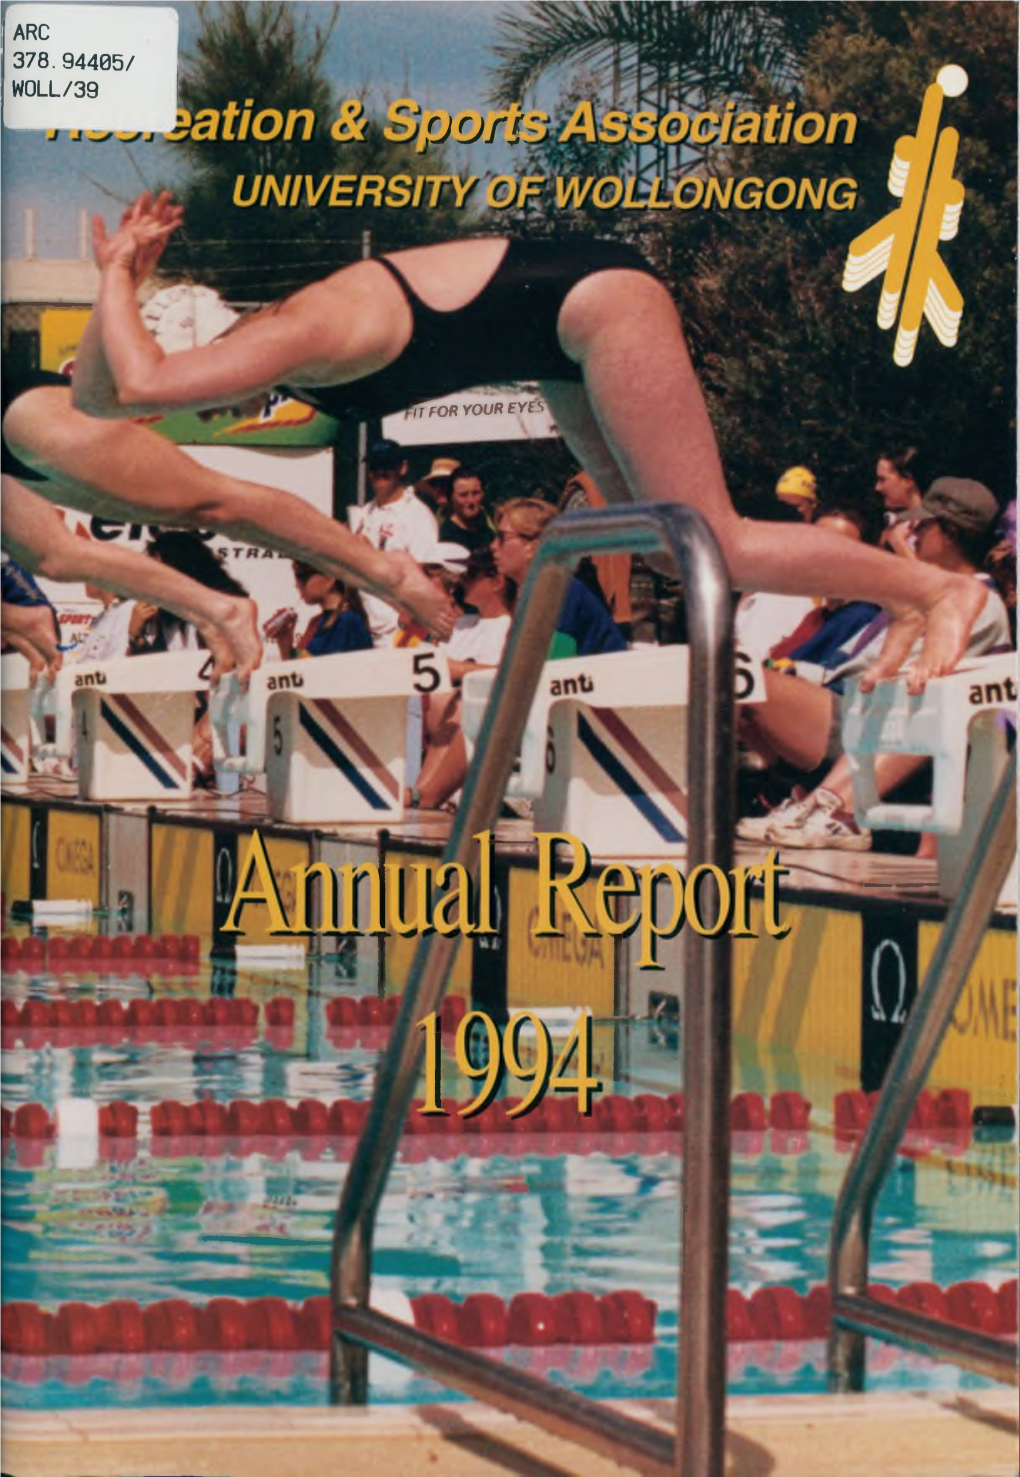 University of Wollongong Recreation and Sports Association Annual Report 1994